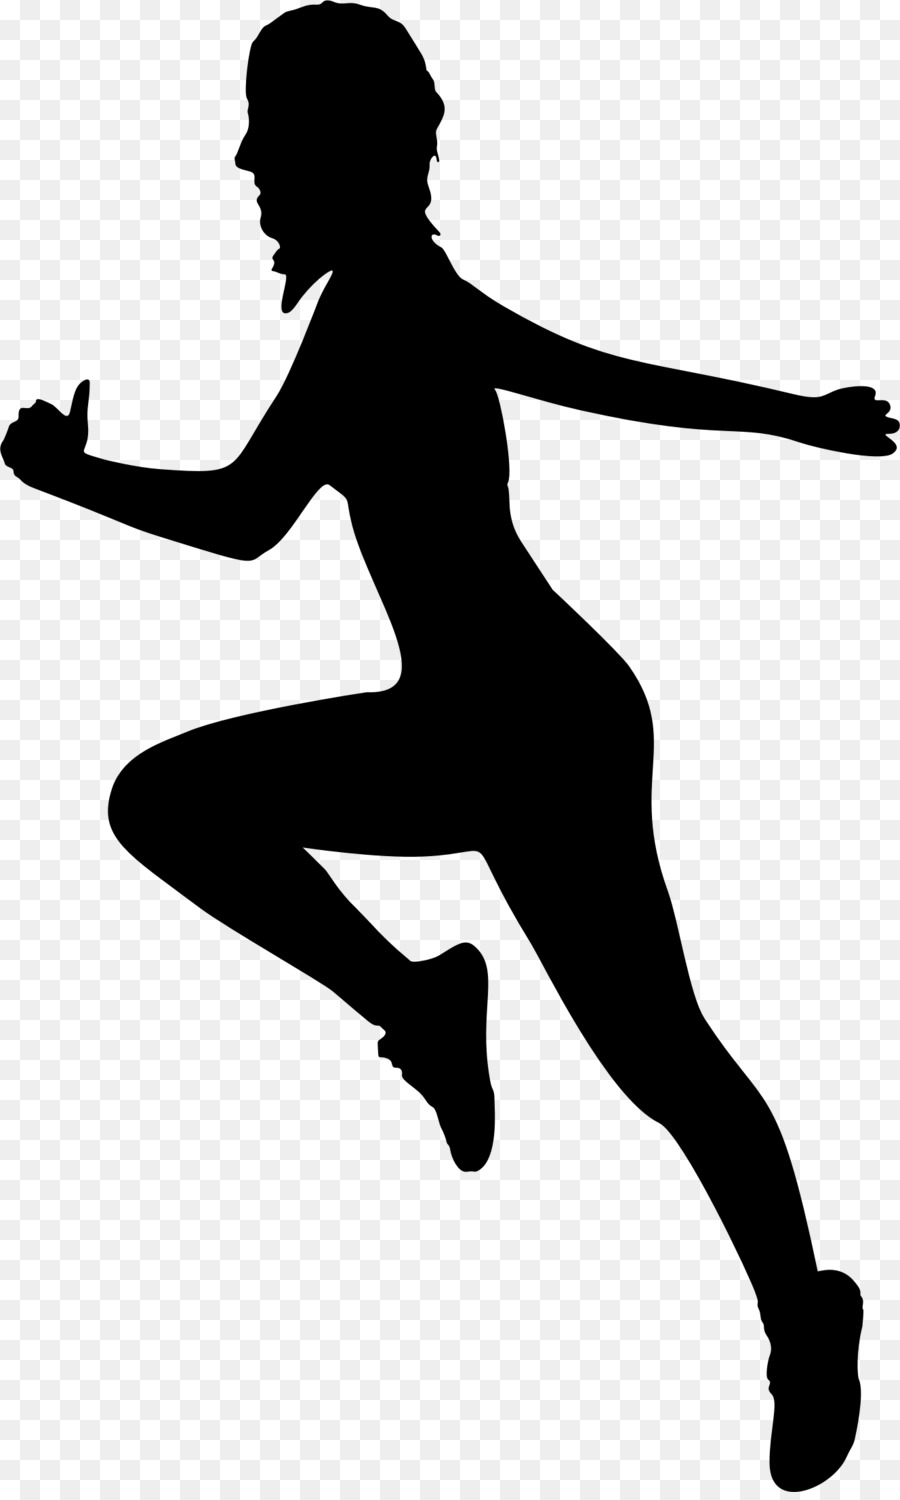 Silhouette Physical exercise Woman - excersice png download - 1328*2201 - Free Transparent Silhouette png Download.